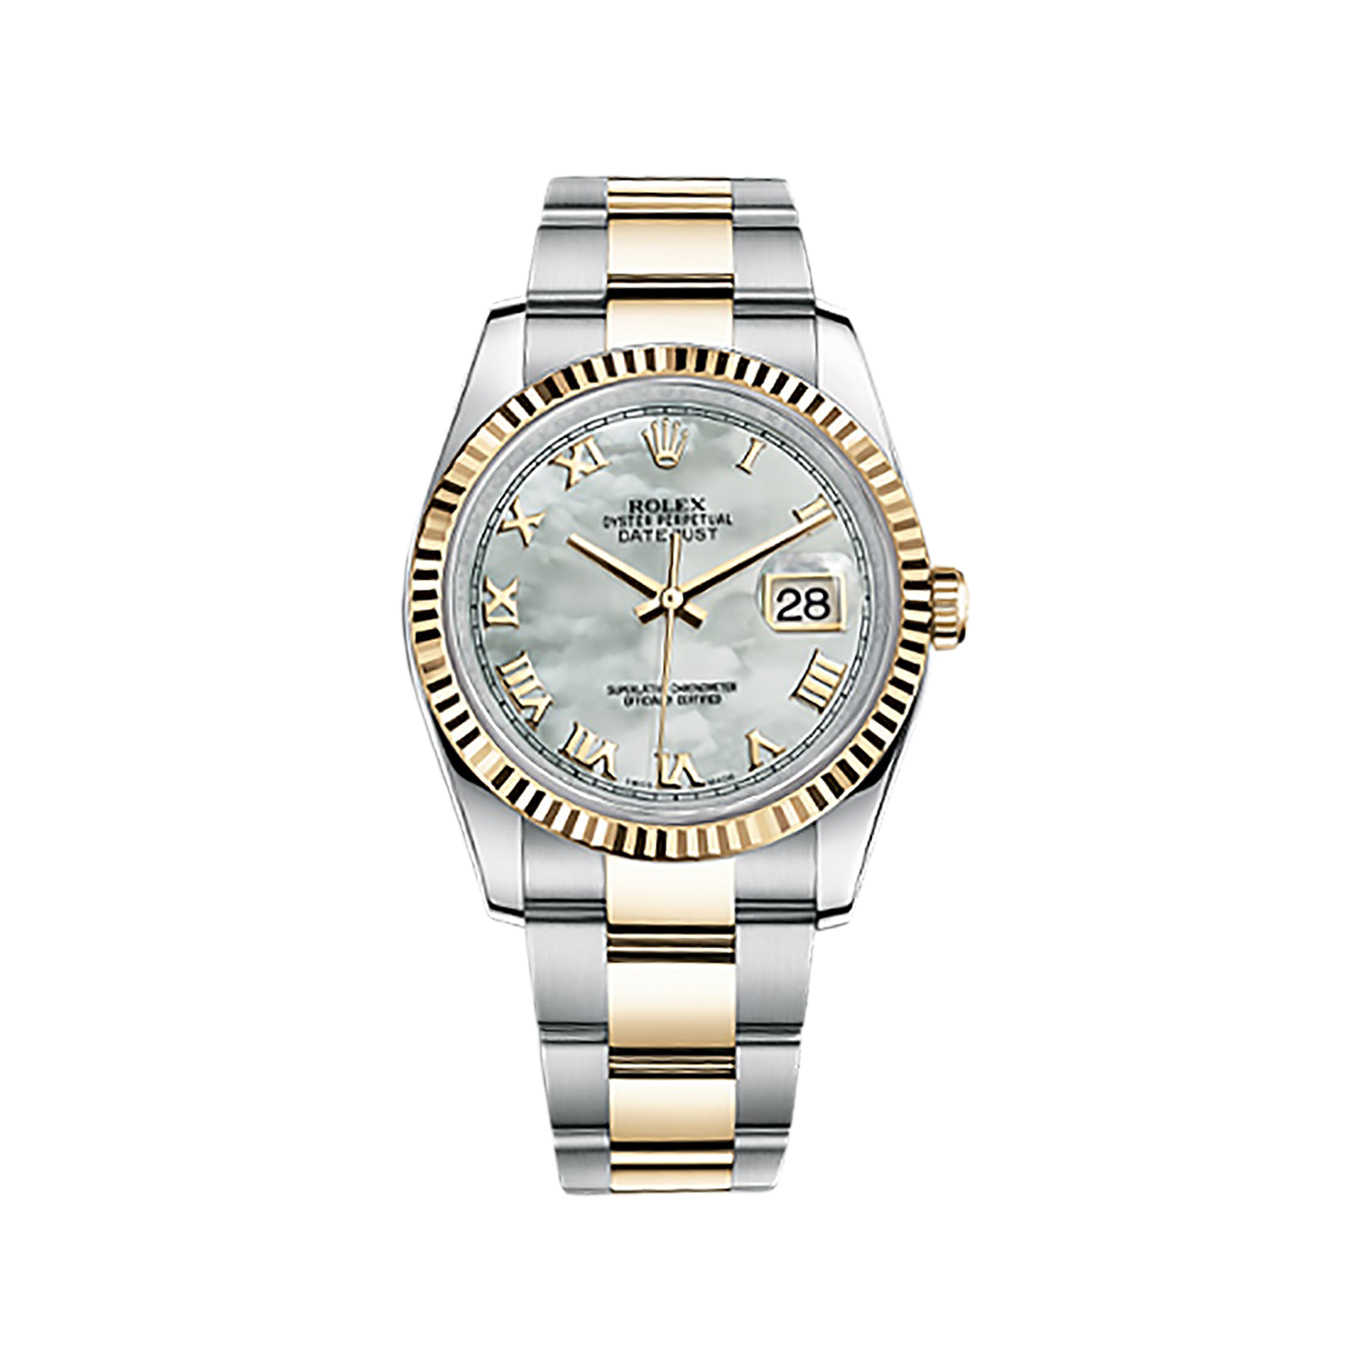 Datejust 36 116233 Gold & Stainless Steel Watch (White Mother-of-Pearl)